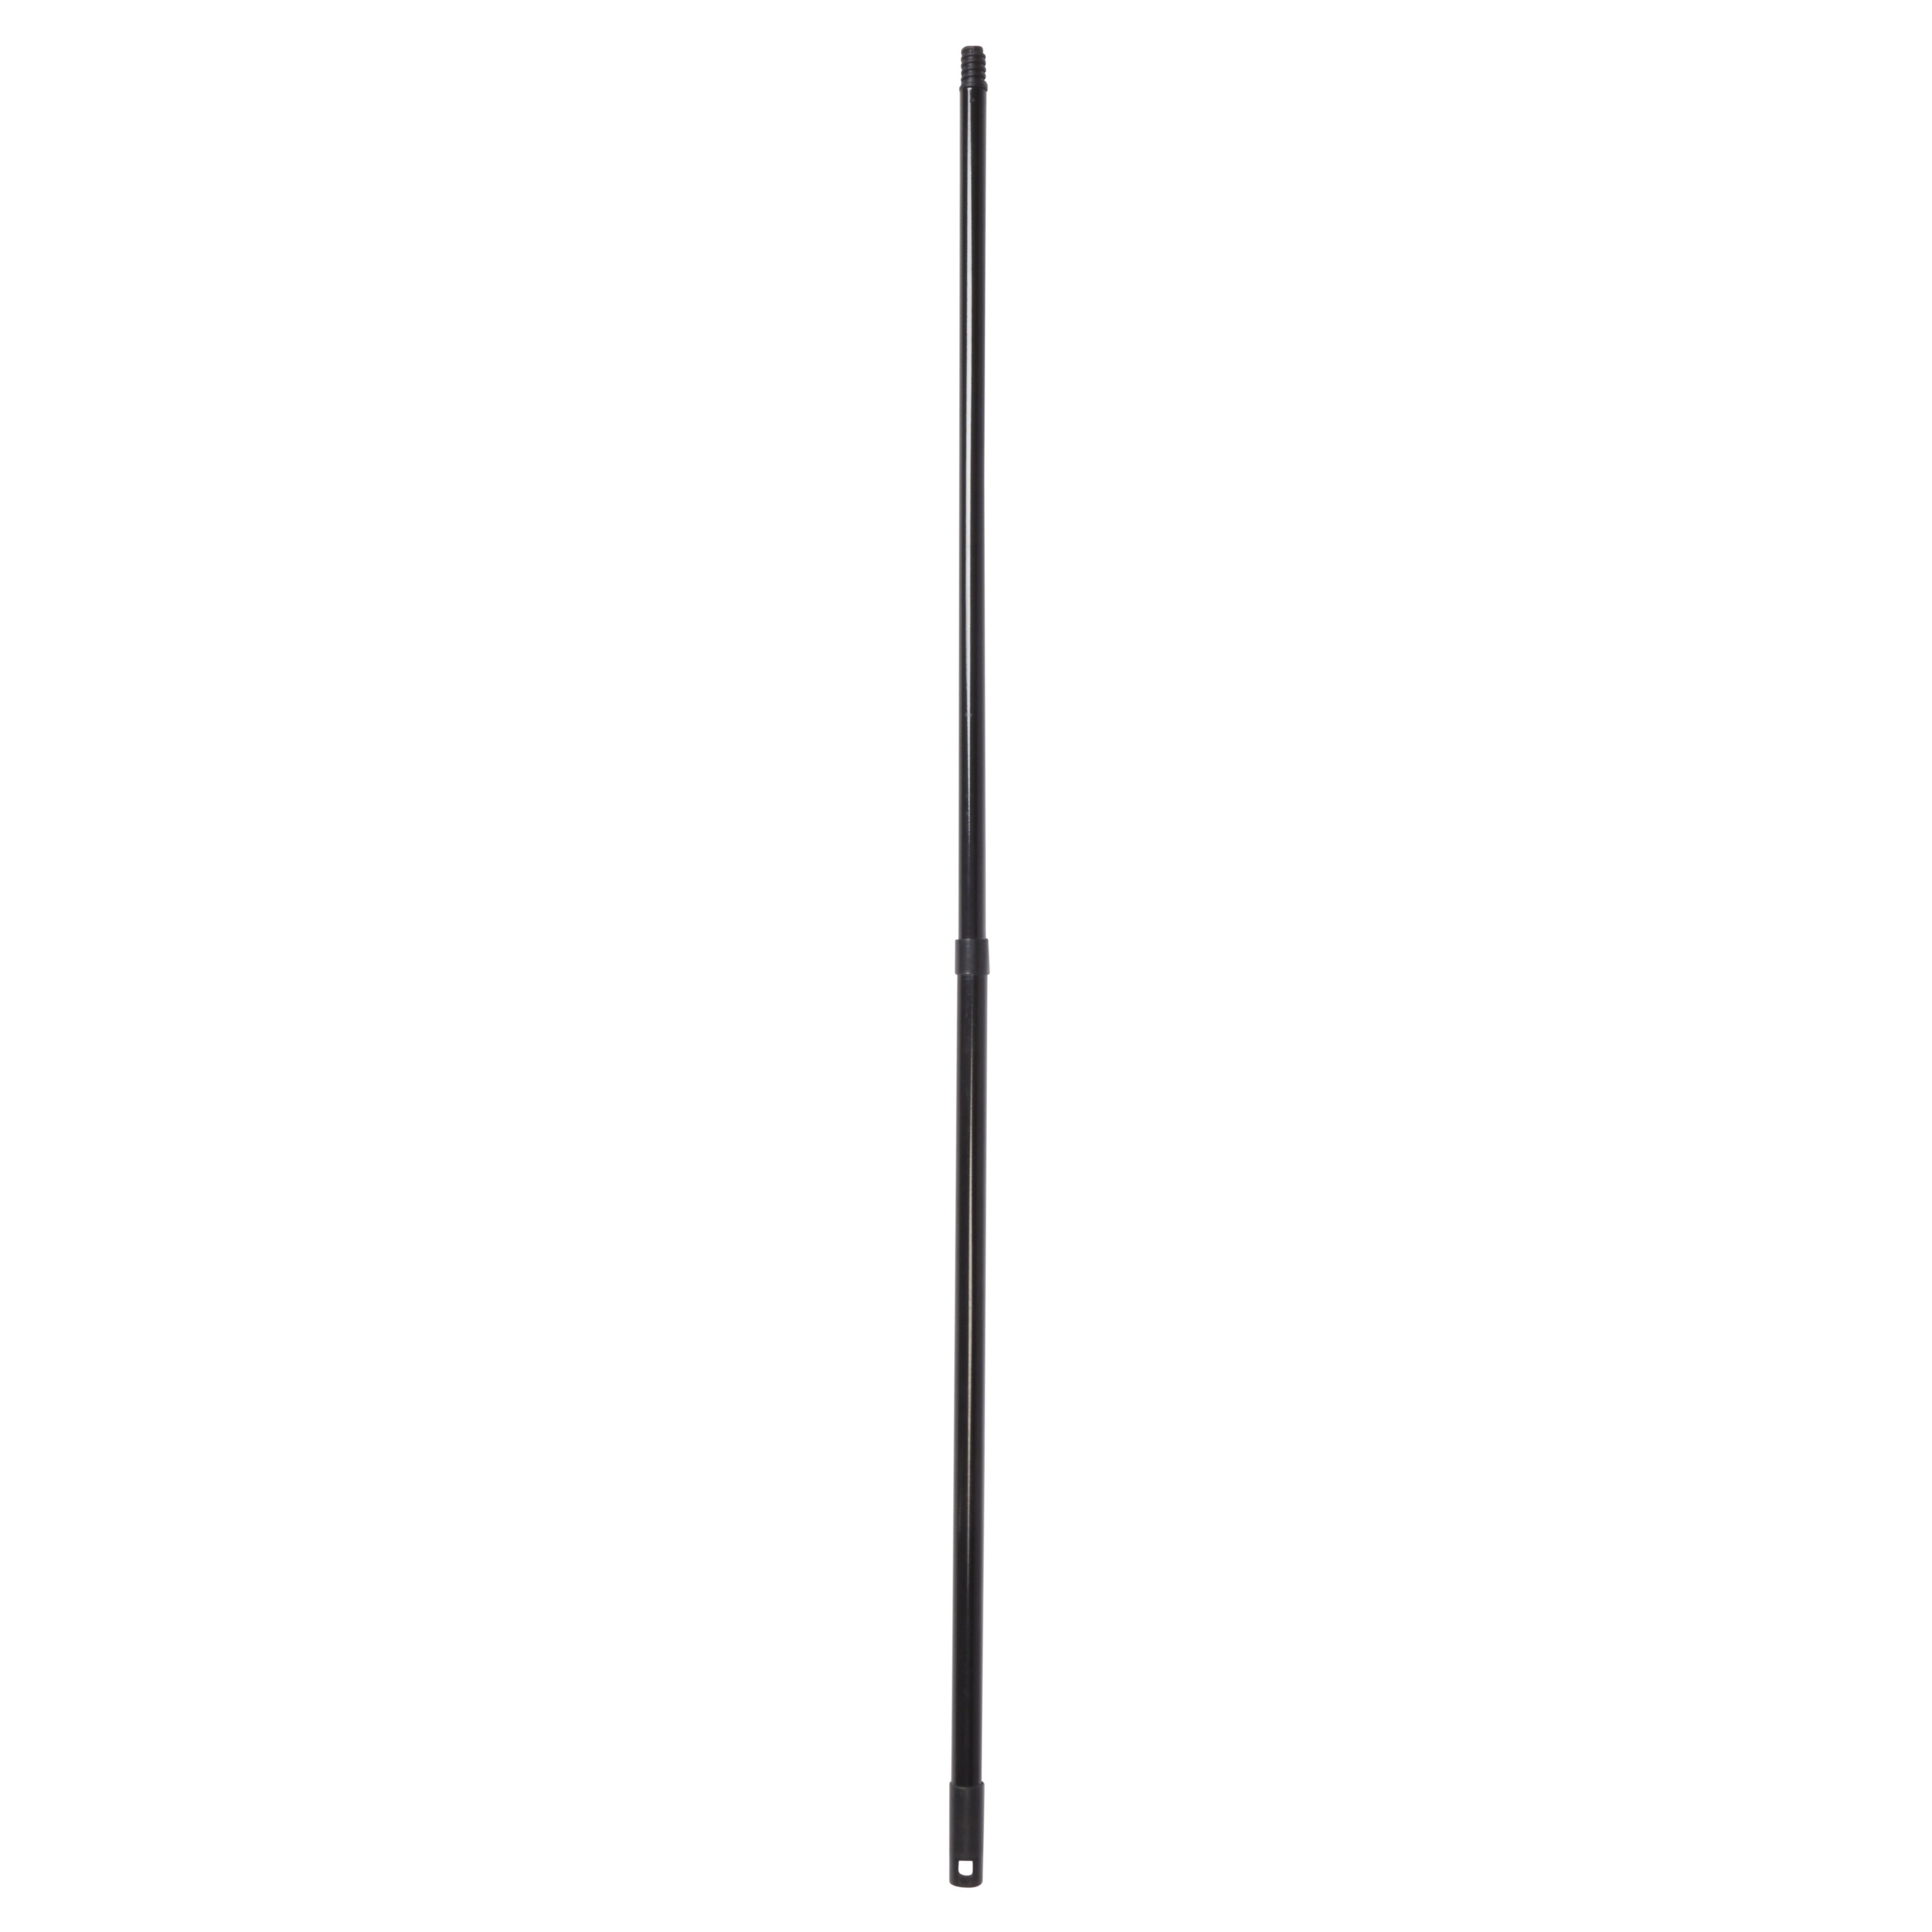 Purdy Power Lock 2-ft to 4-ft Telescoping Threaded Extension Pole 140855624